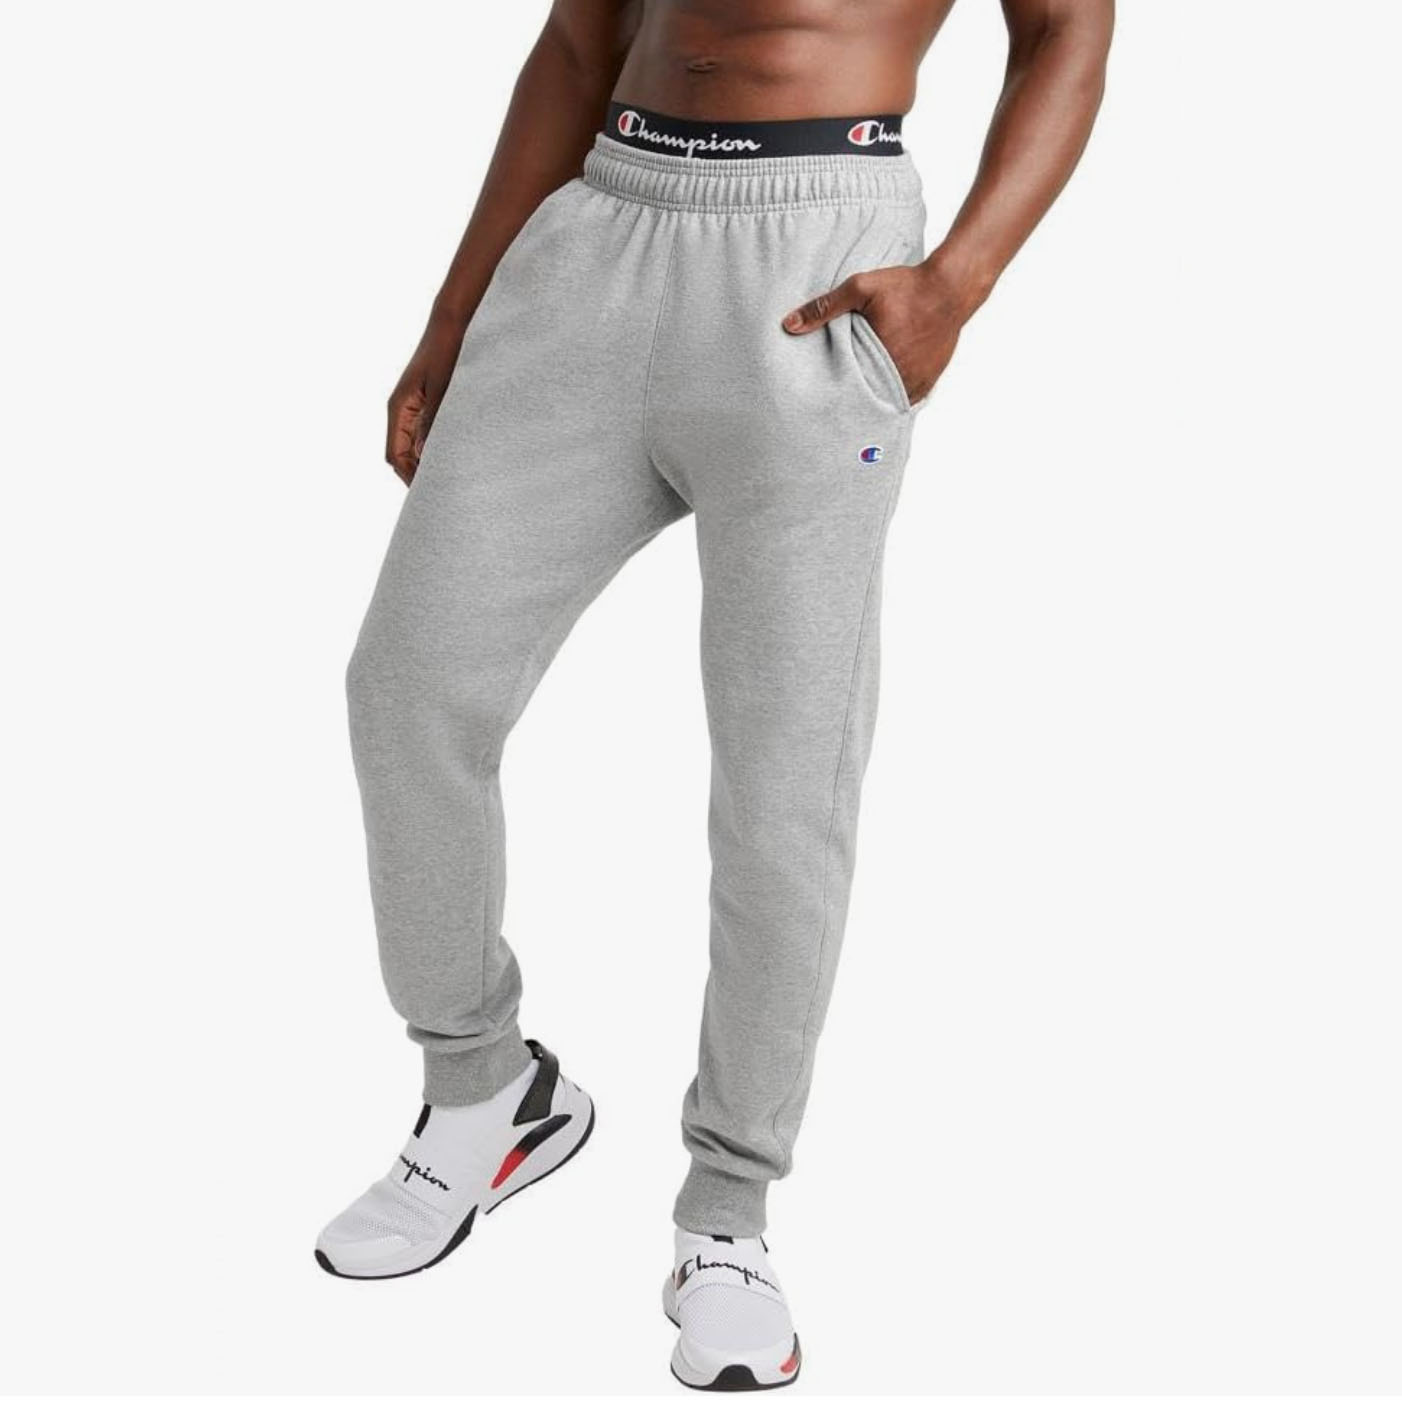 Mean wearing grey sweatpants with Champion's logo